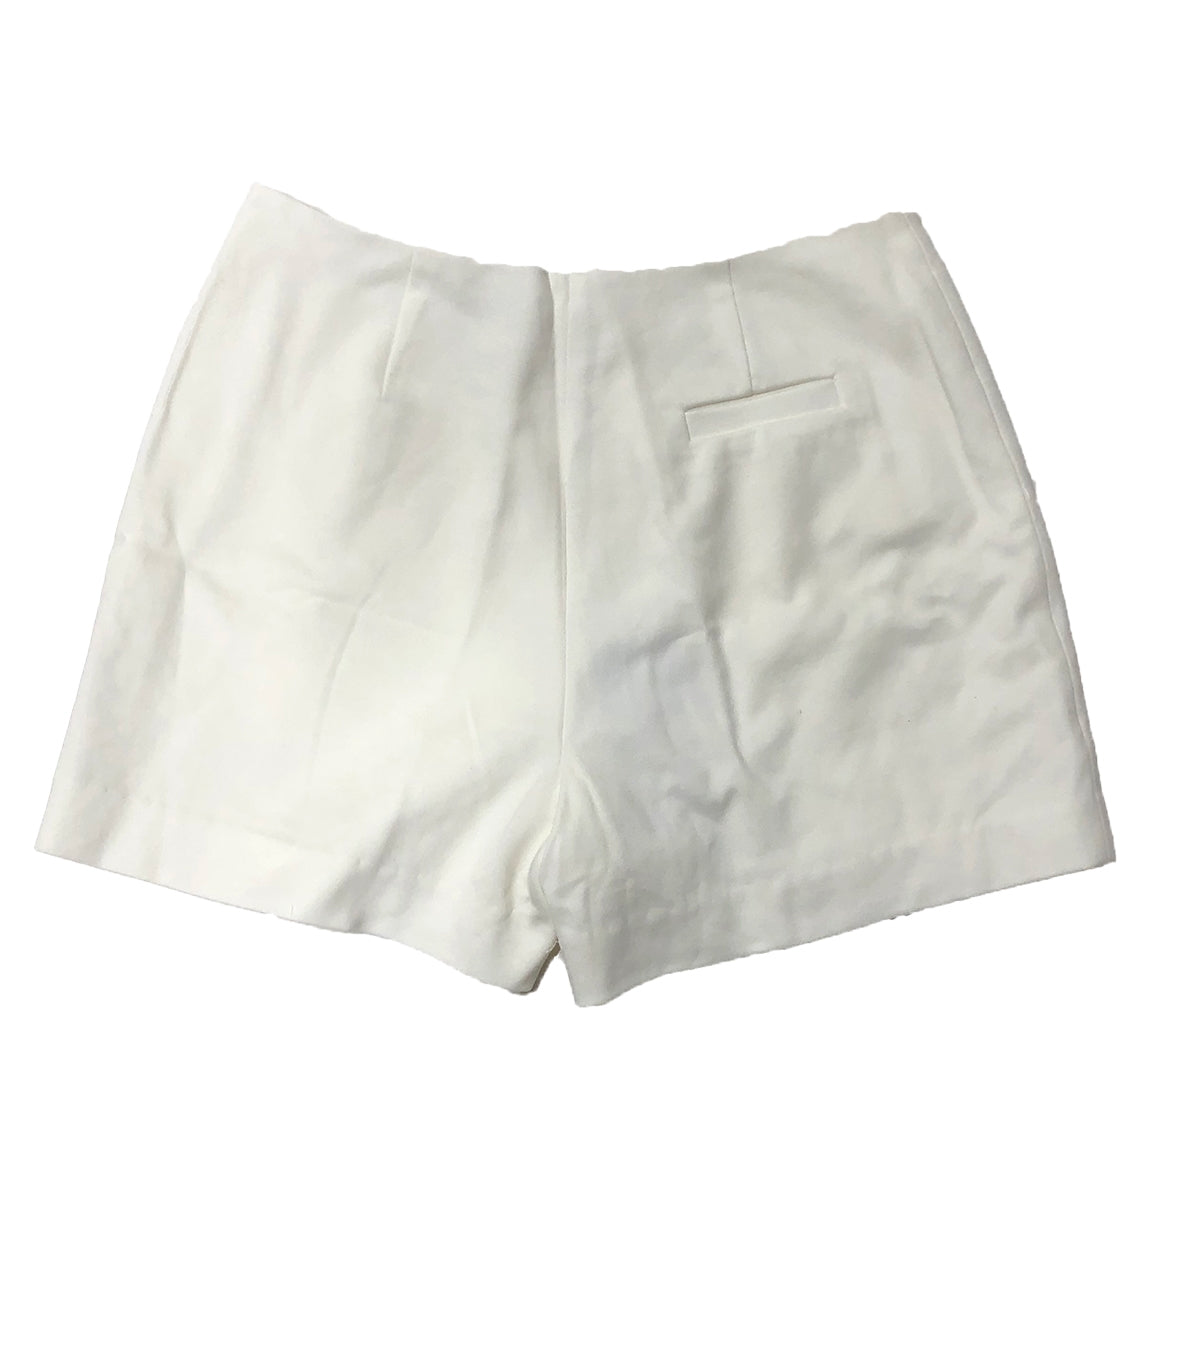 Cotton Pique Shorts - Lined Made in USA | RAMBLERS WAY